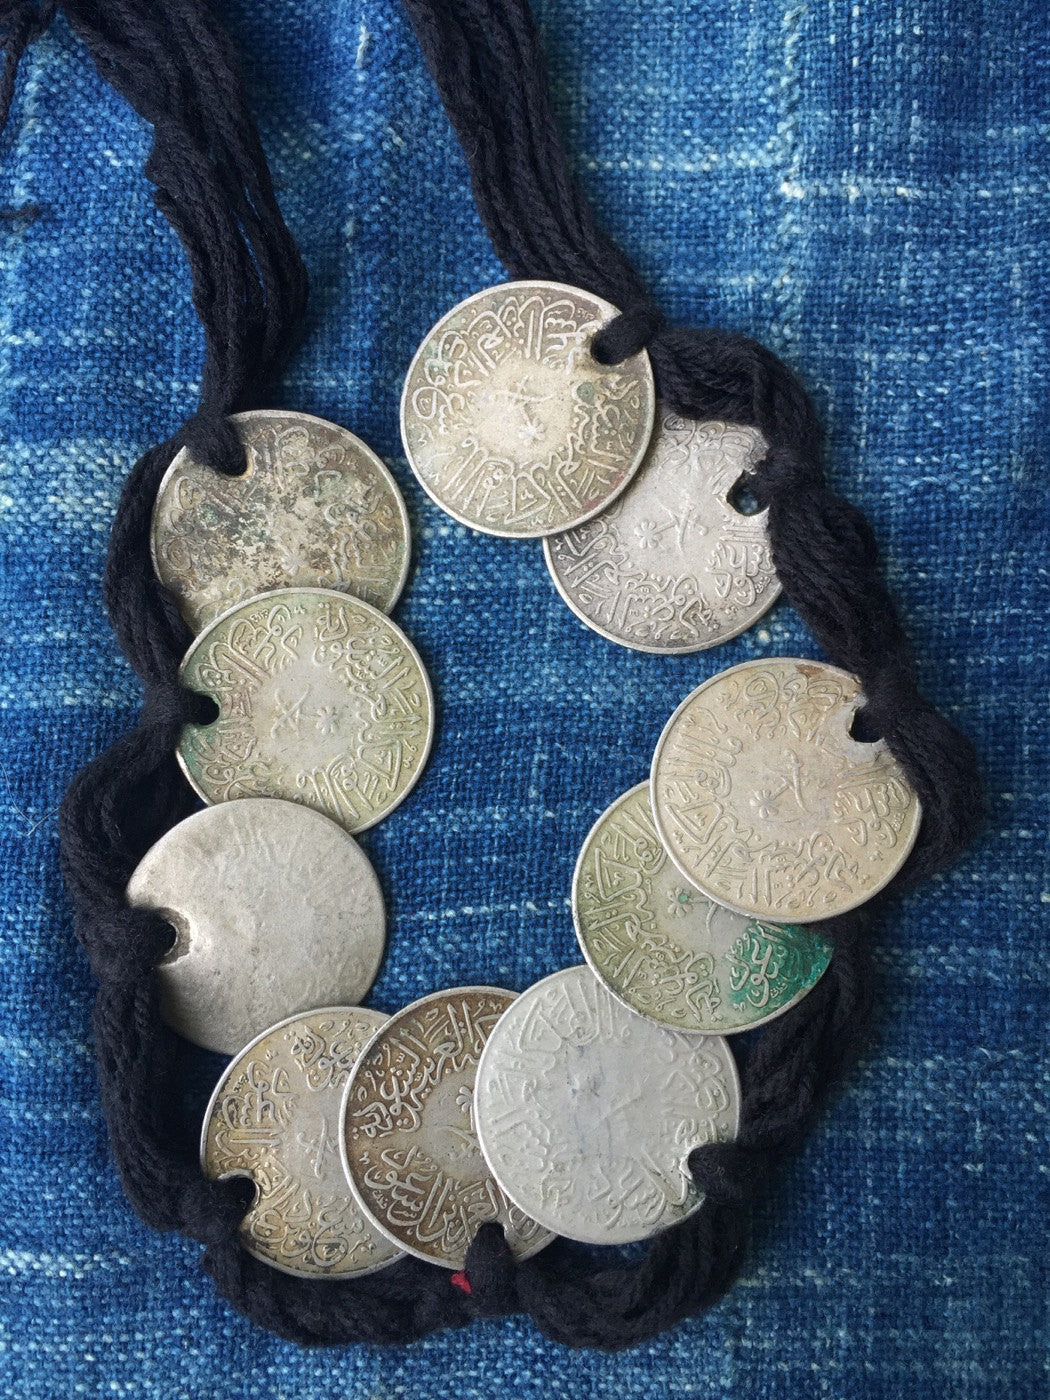 Riches: African Coin Necklace, Niger, Authentic, Rare, Bold Tribal Fashion, Vintage Coin Jewelry, Boho Bohemian Headpiece, Fall Fashion - ShopWomanShopsWorld.com. Bone Beads, Tassels, Pom Poms, African Beads.